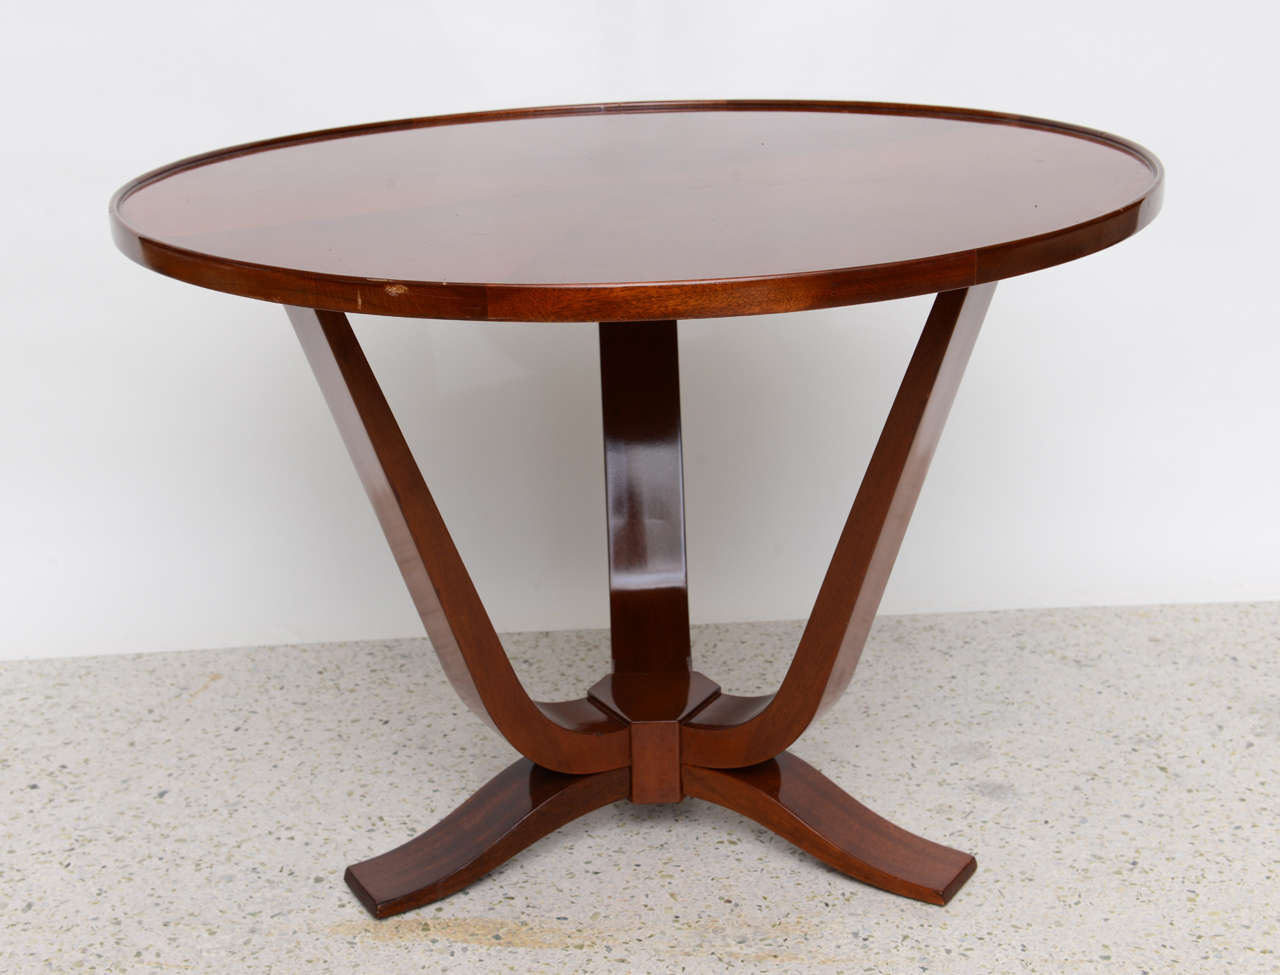 Late Art Deco Mahogany Occasional Table In Excellent Condition For Sale In Hollywood, FL